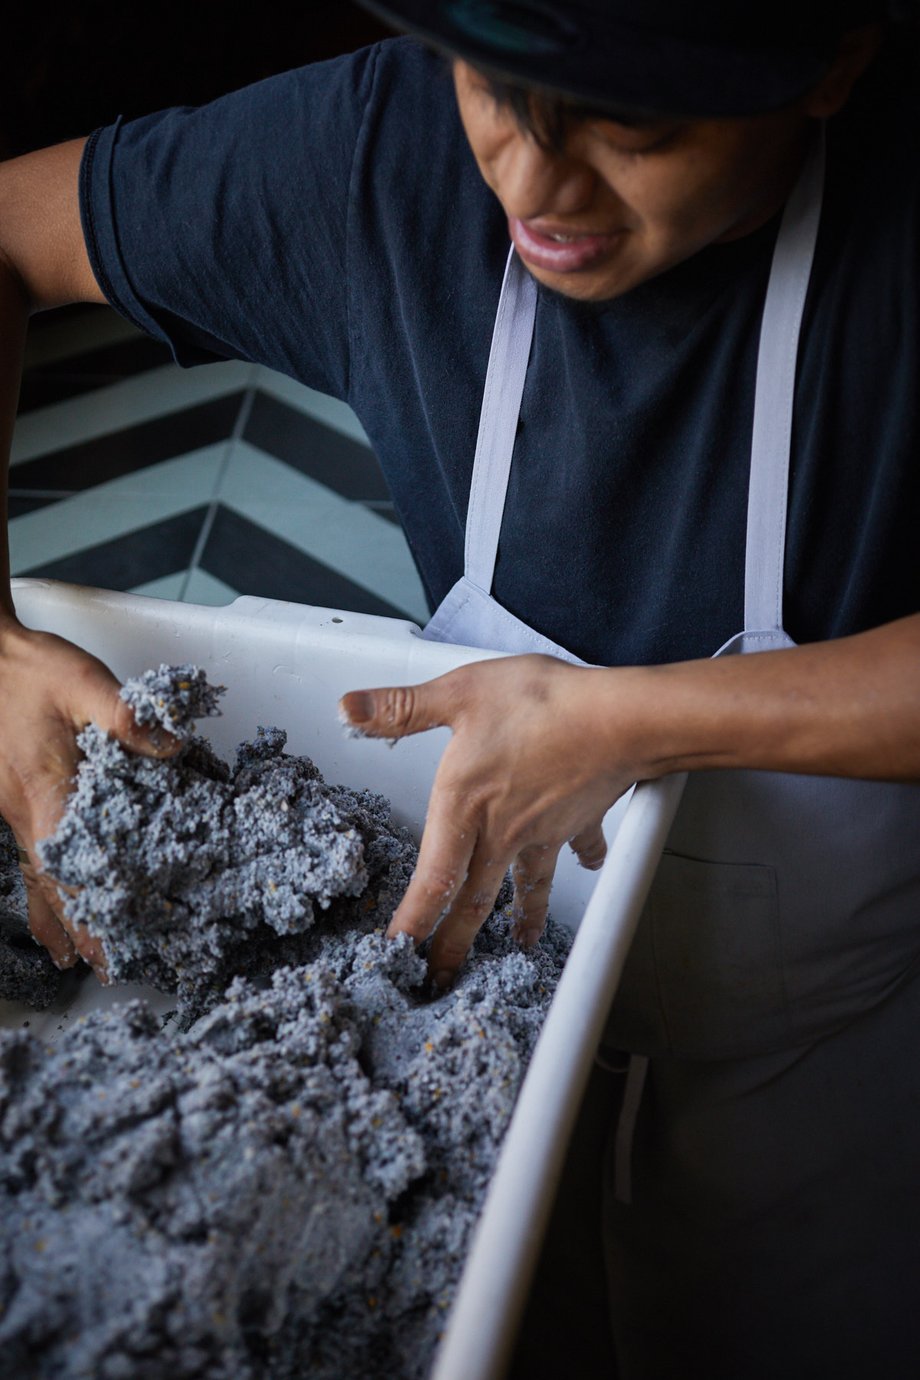 Jody Horton snaps a shot of a kitchen employee mixing blue corn masa with his hands in a large tray